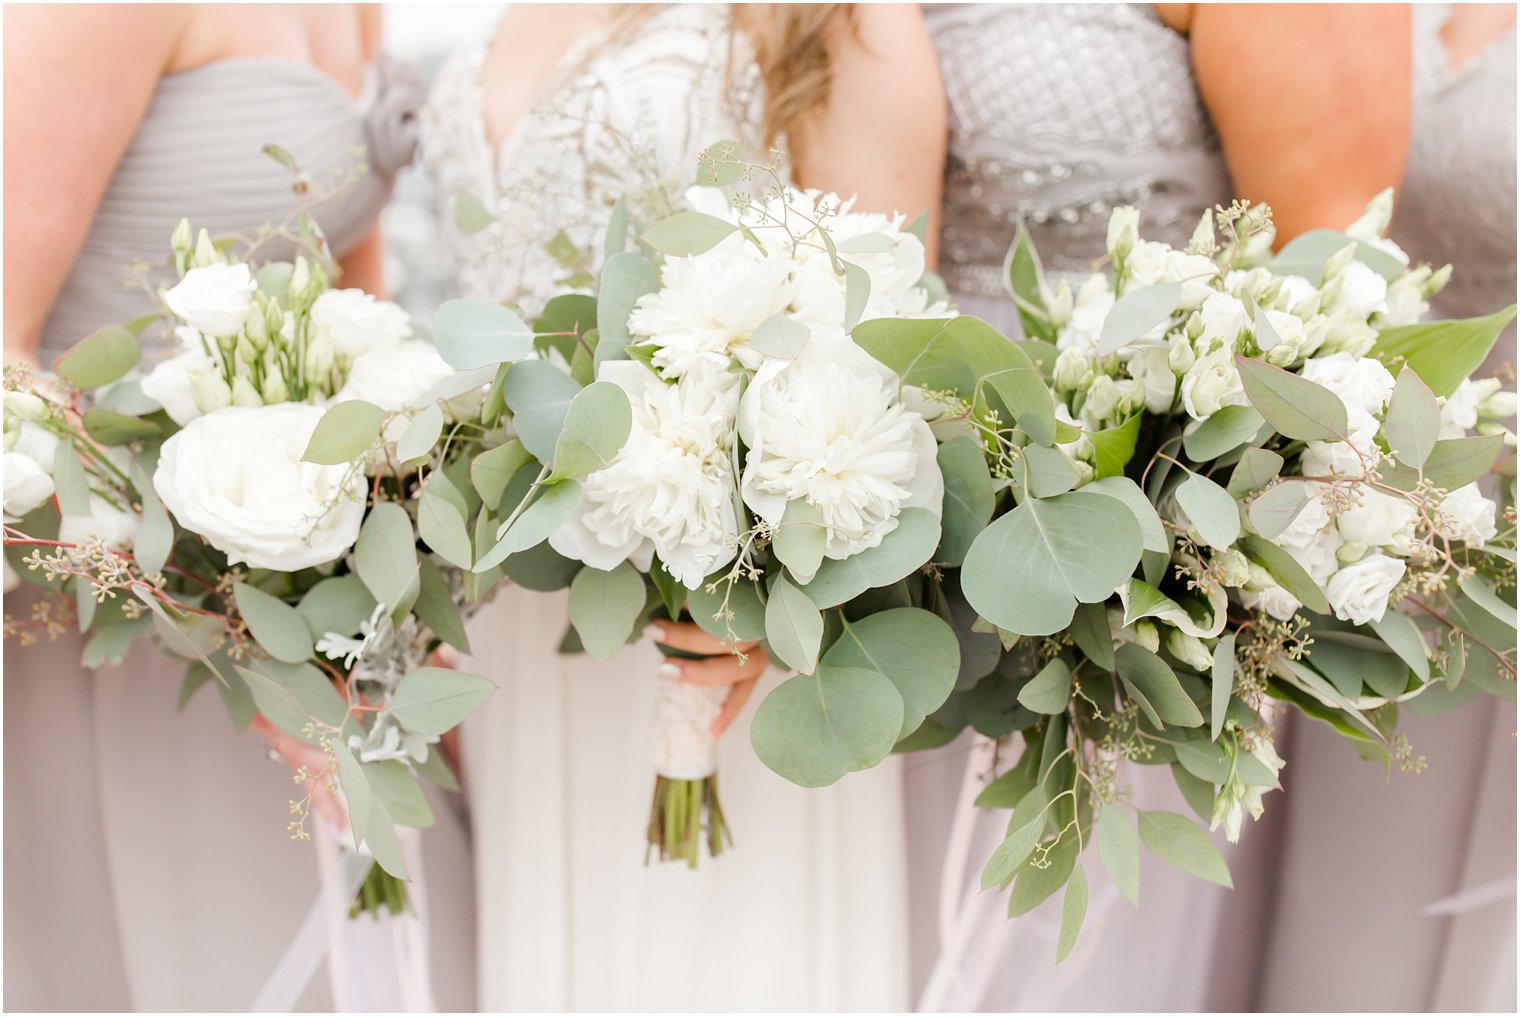 Loose Bouquets with eucalyptus | Published on Style Me Pretty